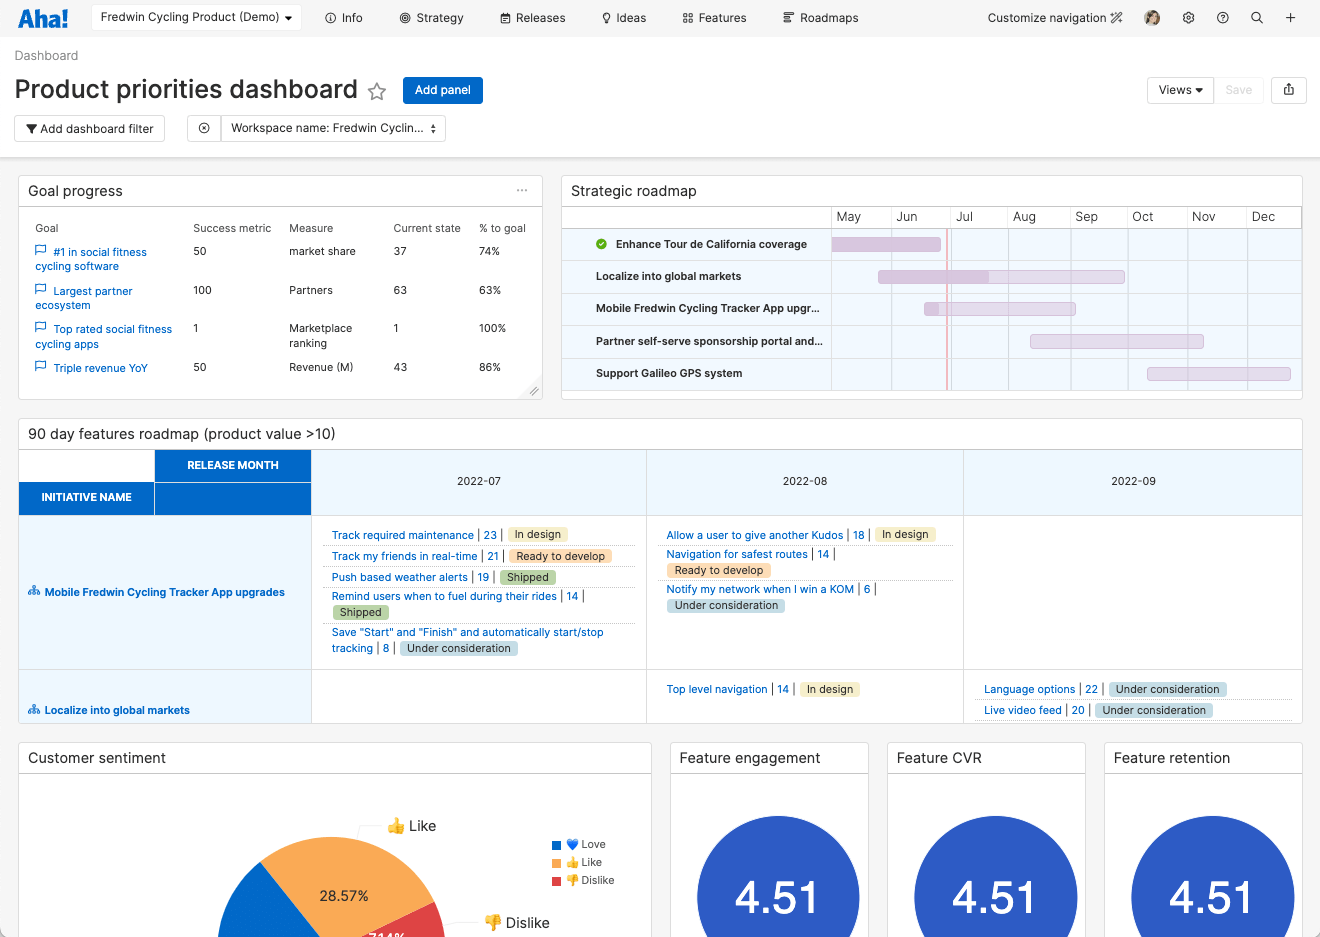 Because dashboards are collections of Aha! Roadmaps views, you can click into any of the data displayed and see more details — without leaving the page. 